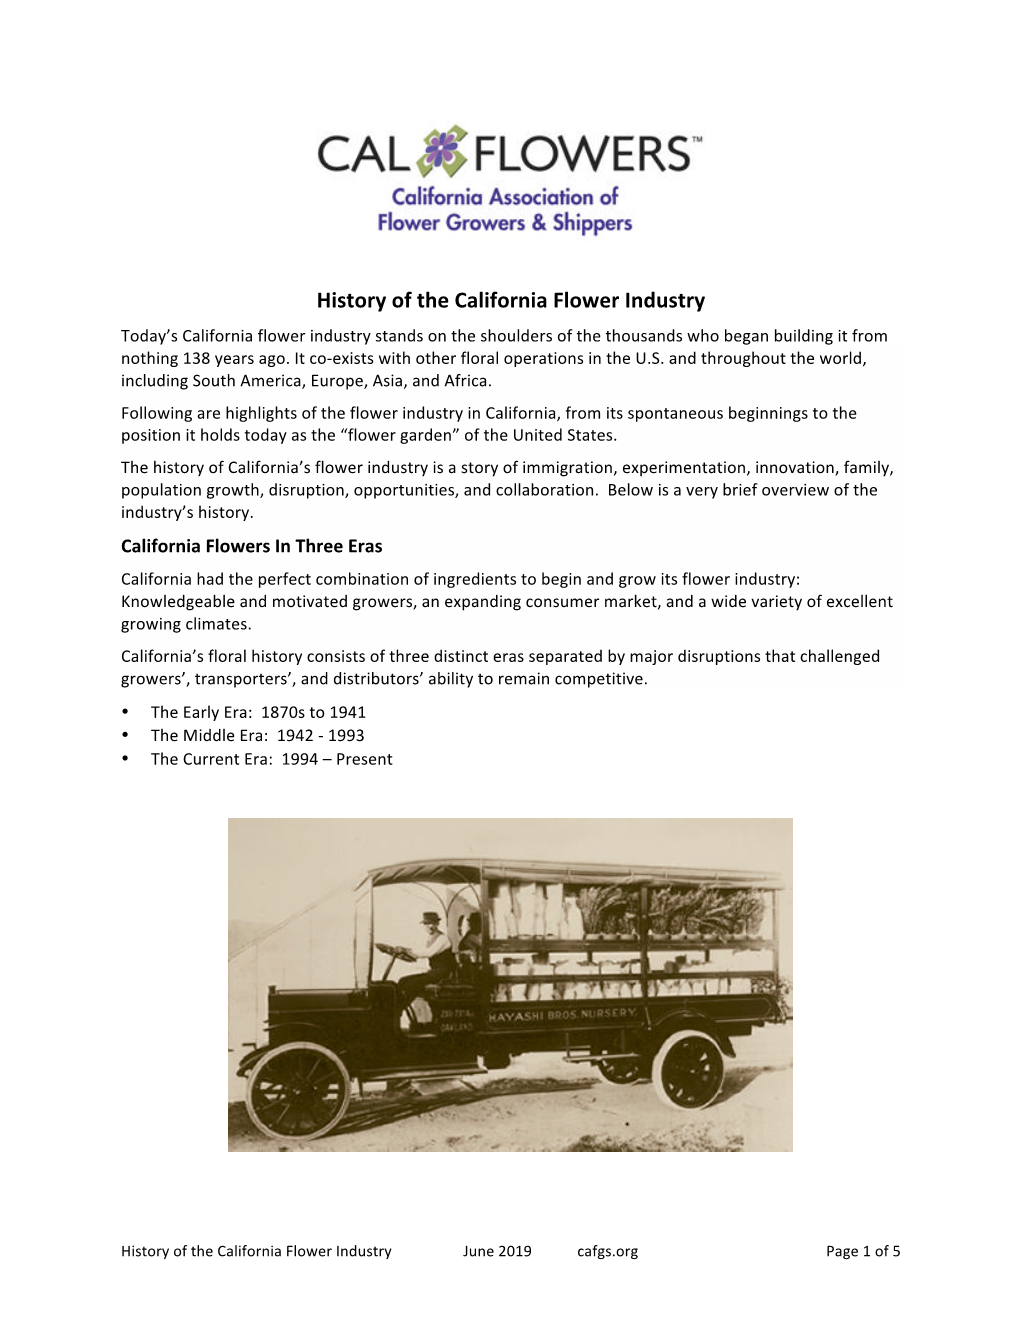 History of the California Flower Industry Today’S California Flower Industry Stands on the Shoulders of the Thousands Who Began Building It from Nothing 138 Years Ago